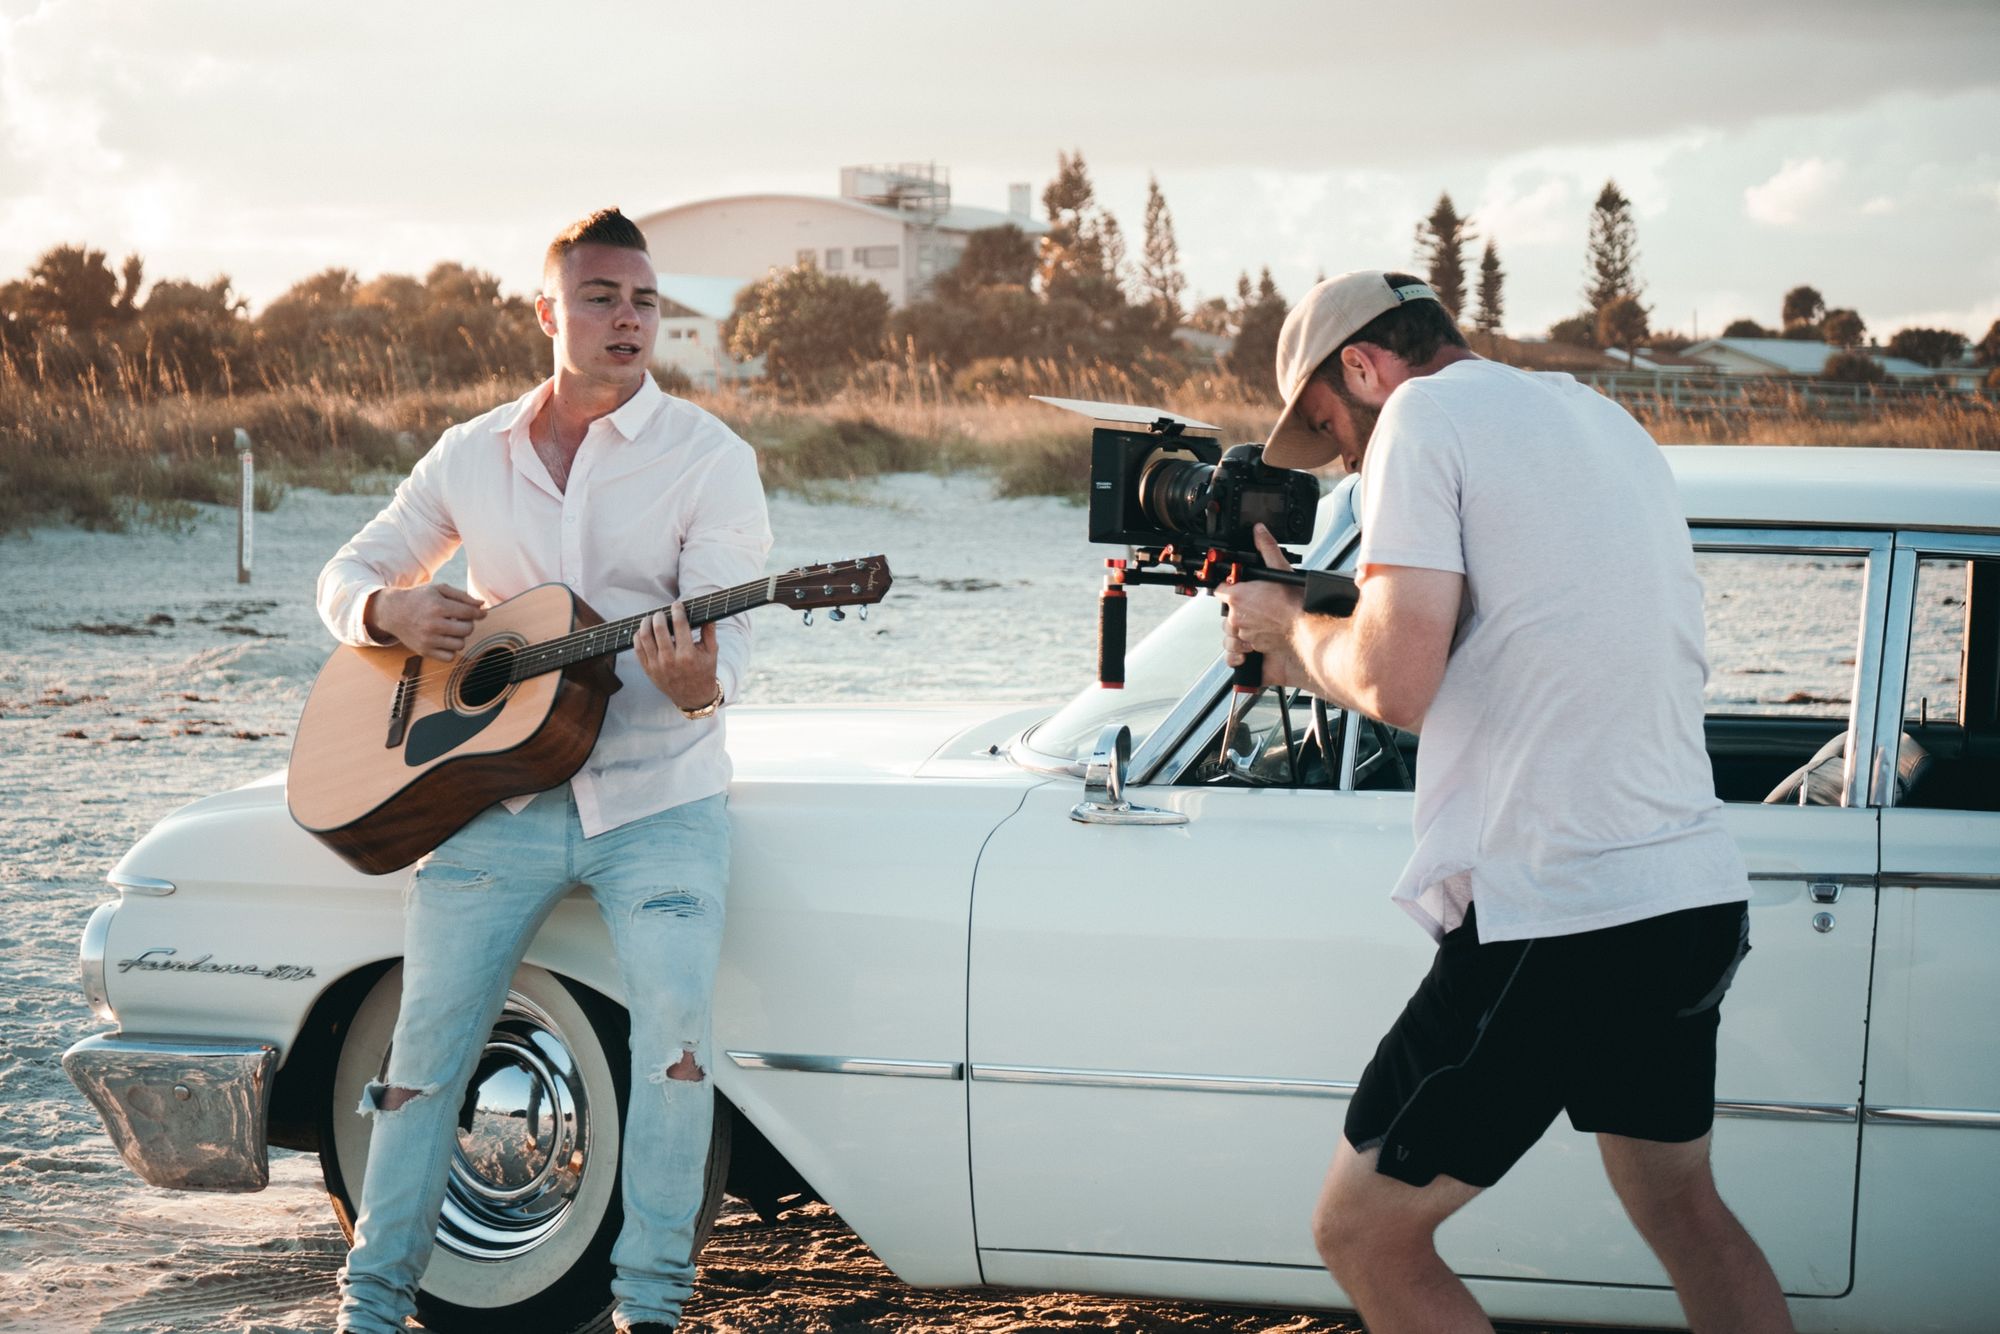 Music video filming outdoors